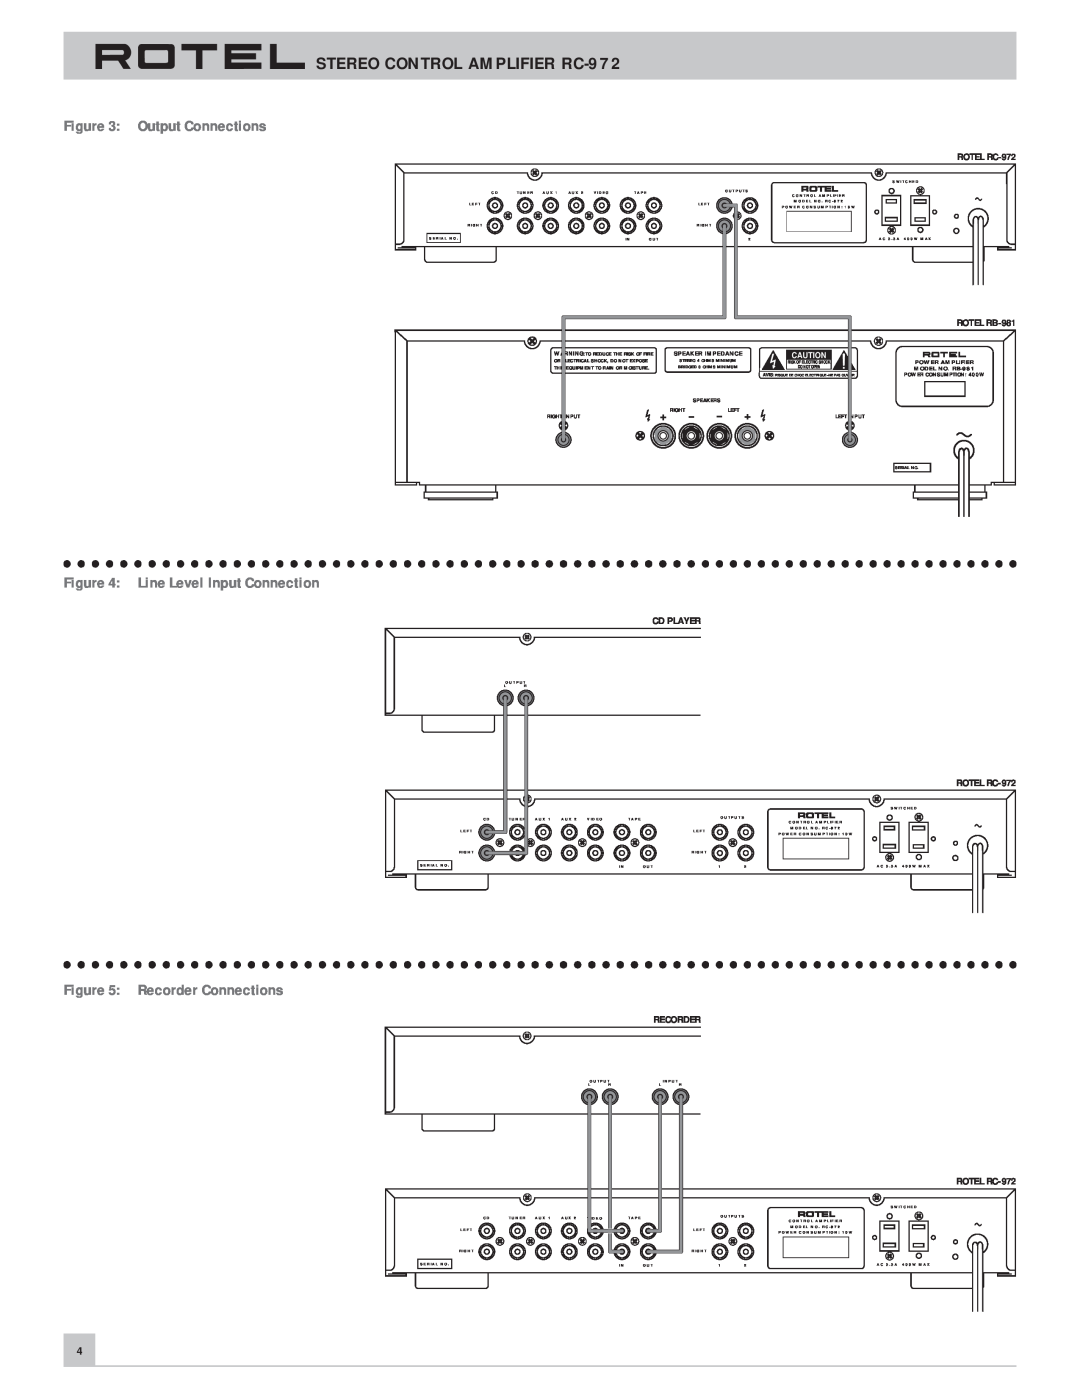 Rotel Output Connections, Line Level Input Connection, Recorder Connections, ROTEL RC-972, Cd Player, ROTEL RB-981 